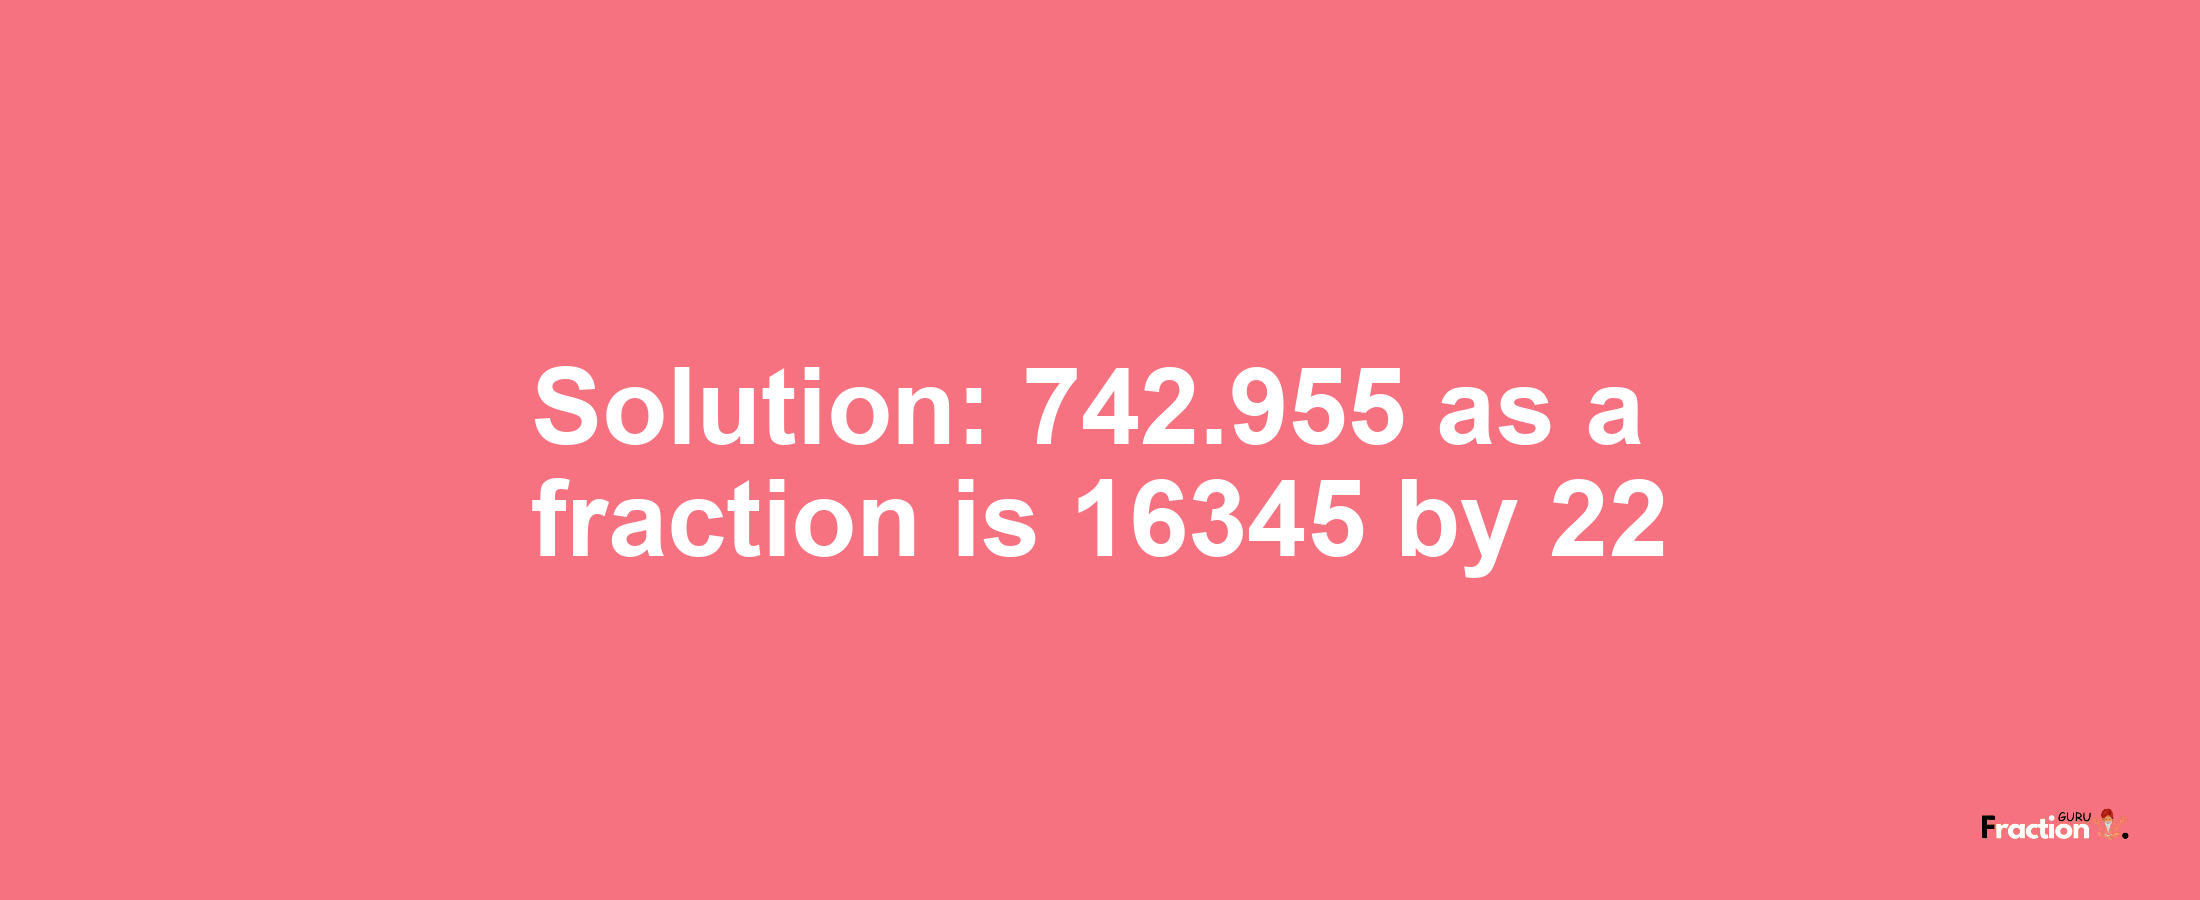 Solution:742.955 as a fraction is 16345/22